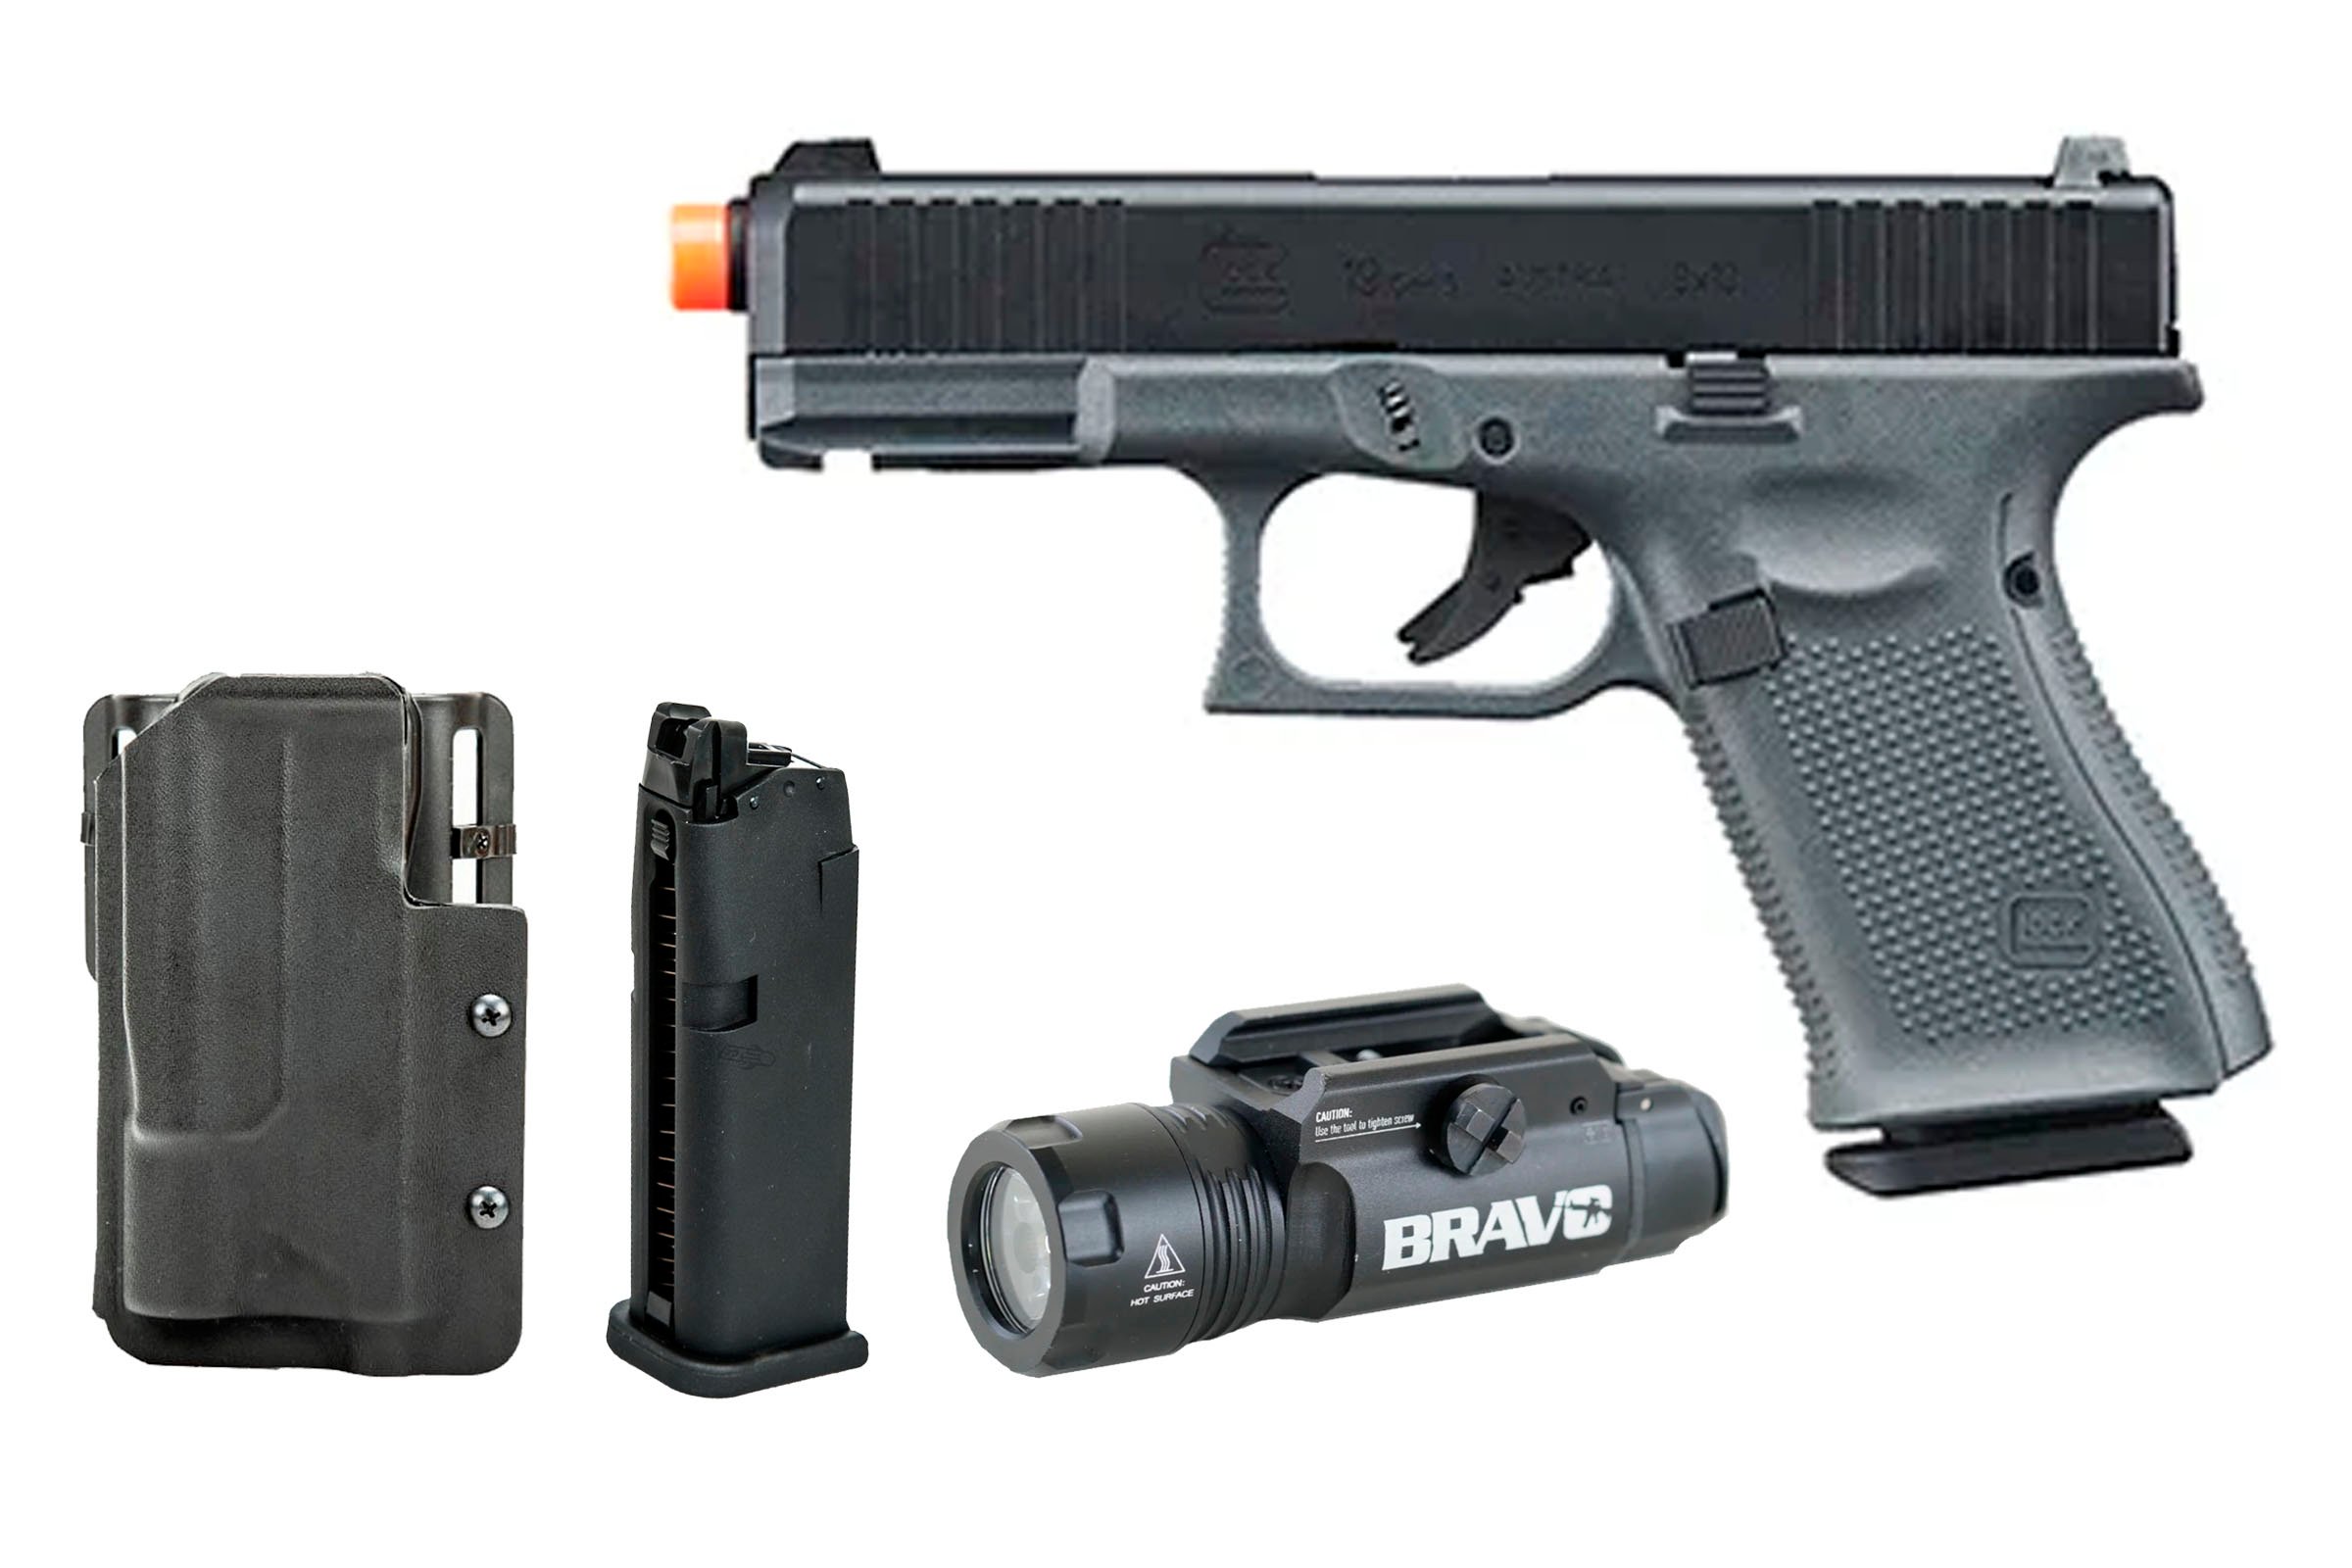 Officially licensed GLOCK airguns and airsoft guns